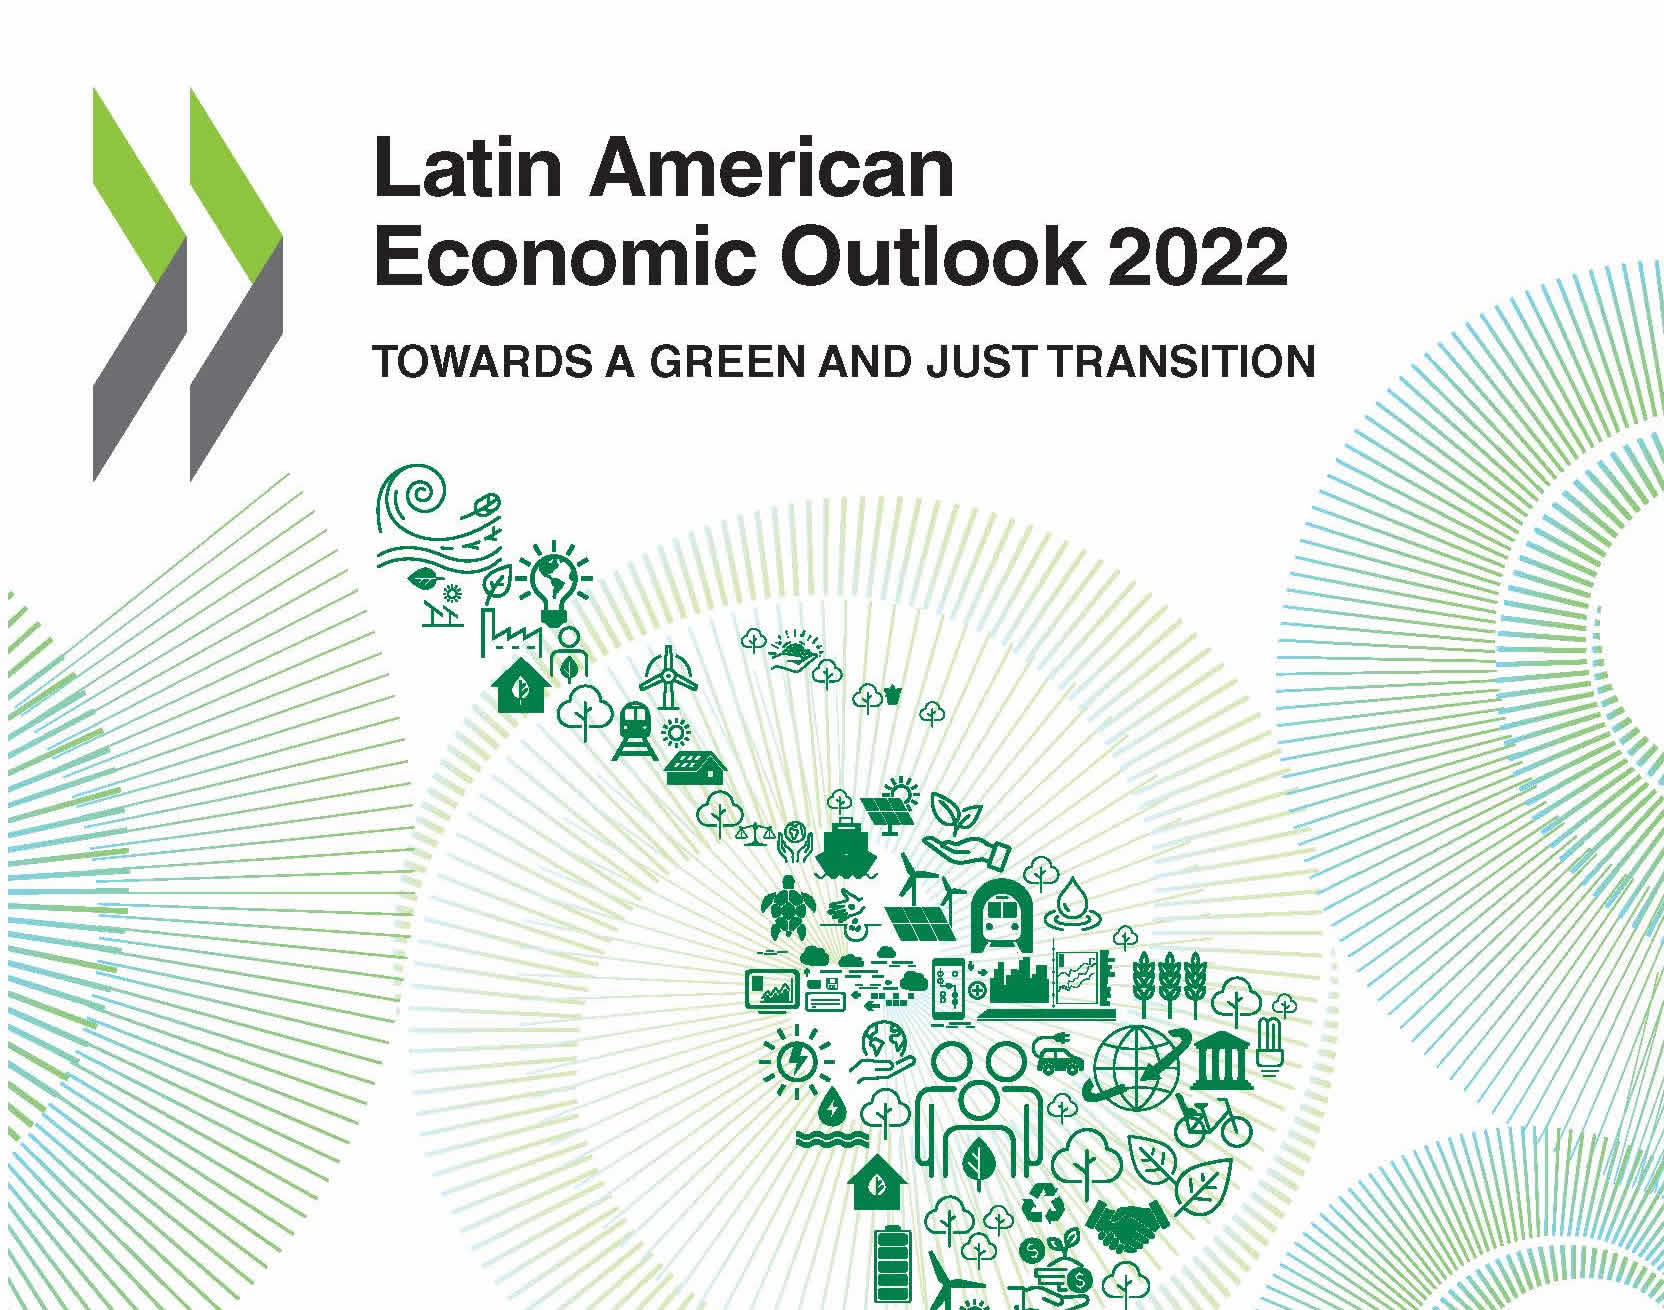 Latin American Business Report 2022: Towards a Green and Equitable